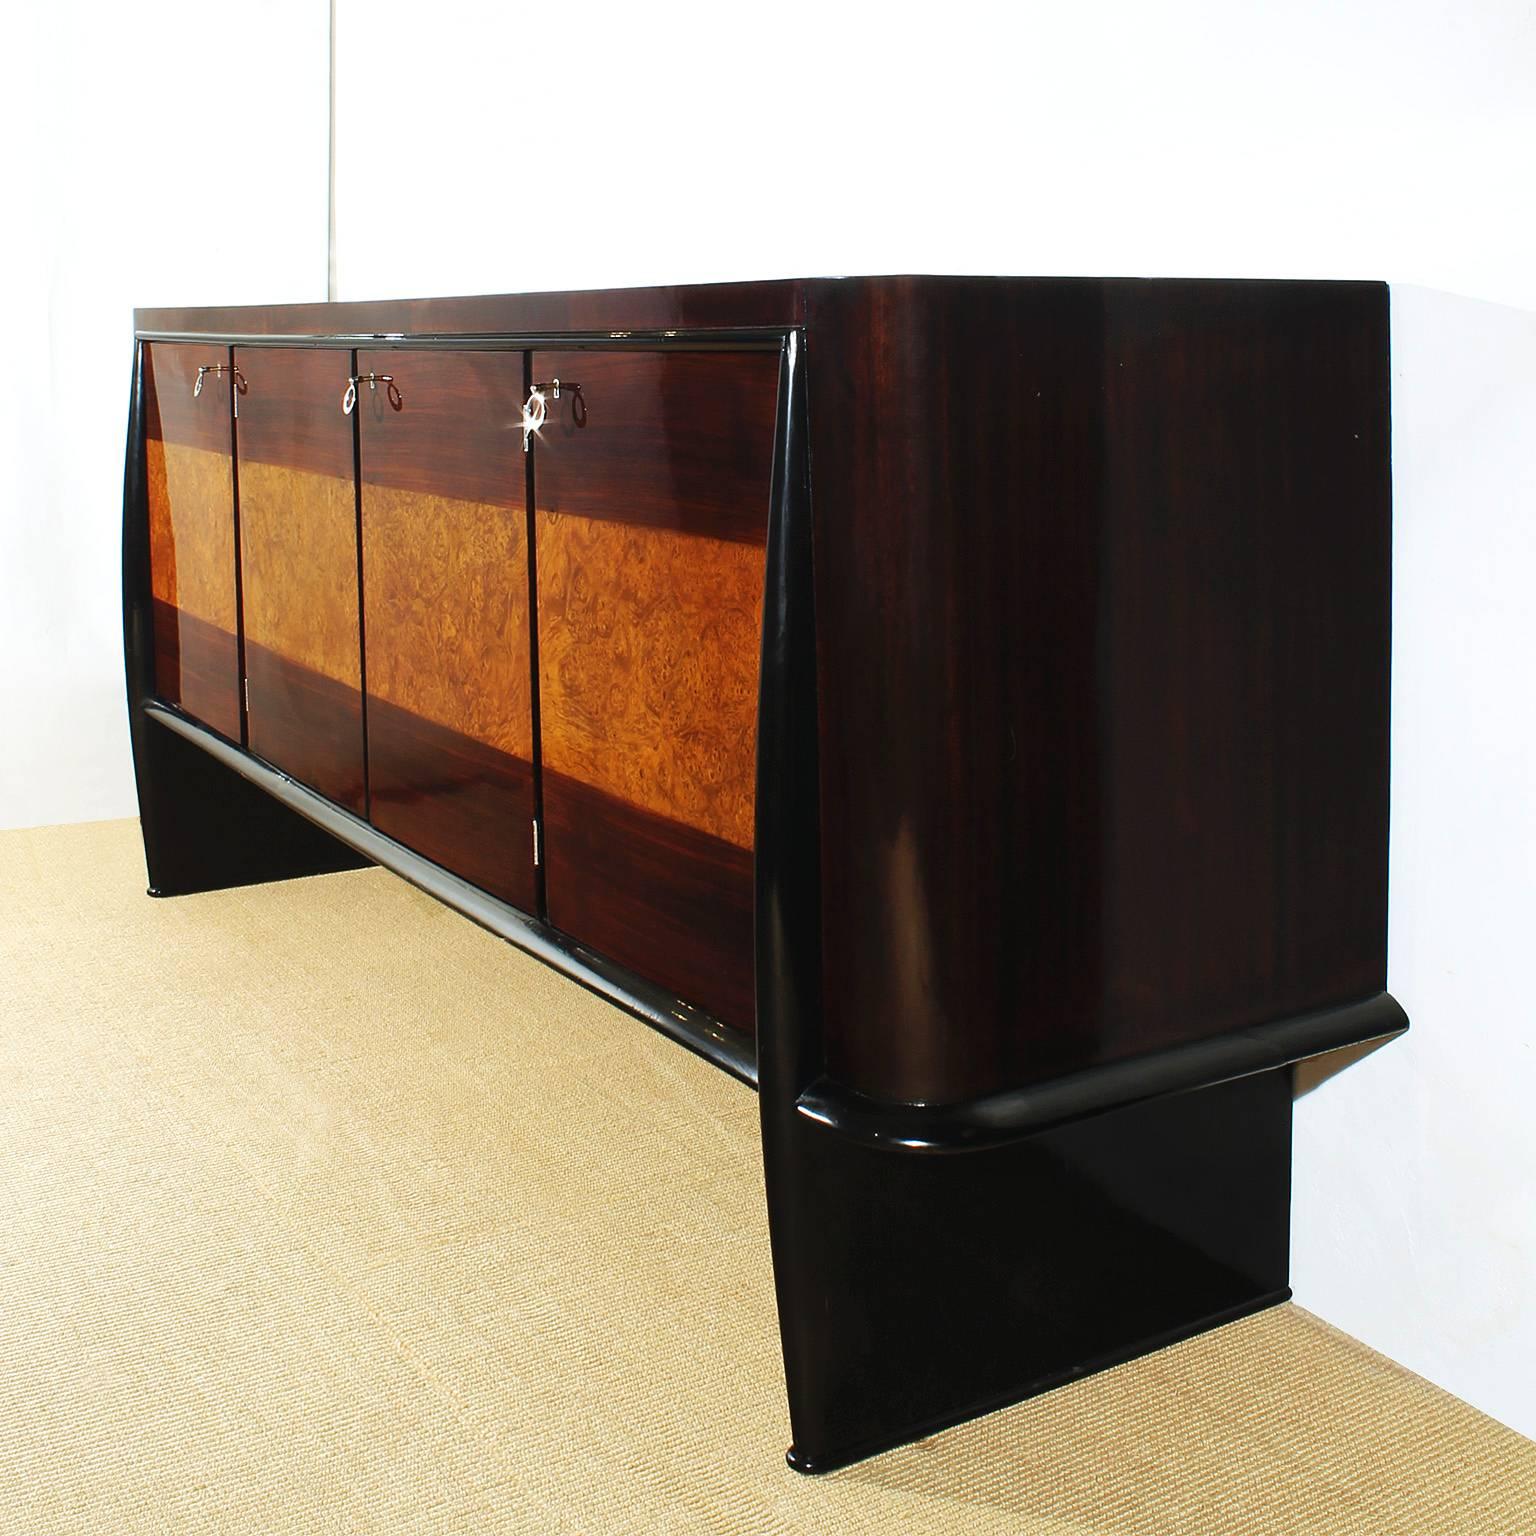 Art Deco sideboard, four doors, mahogany, rosewood and burr elm veneer, French polish, black lacquered feet and frame,

Italy, circa 1930.